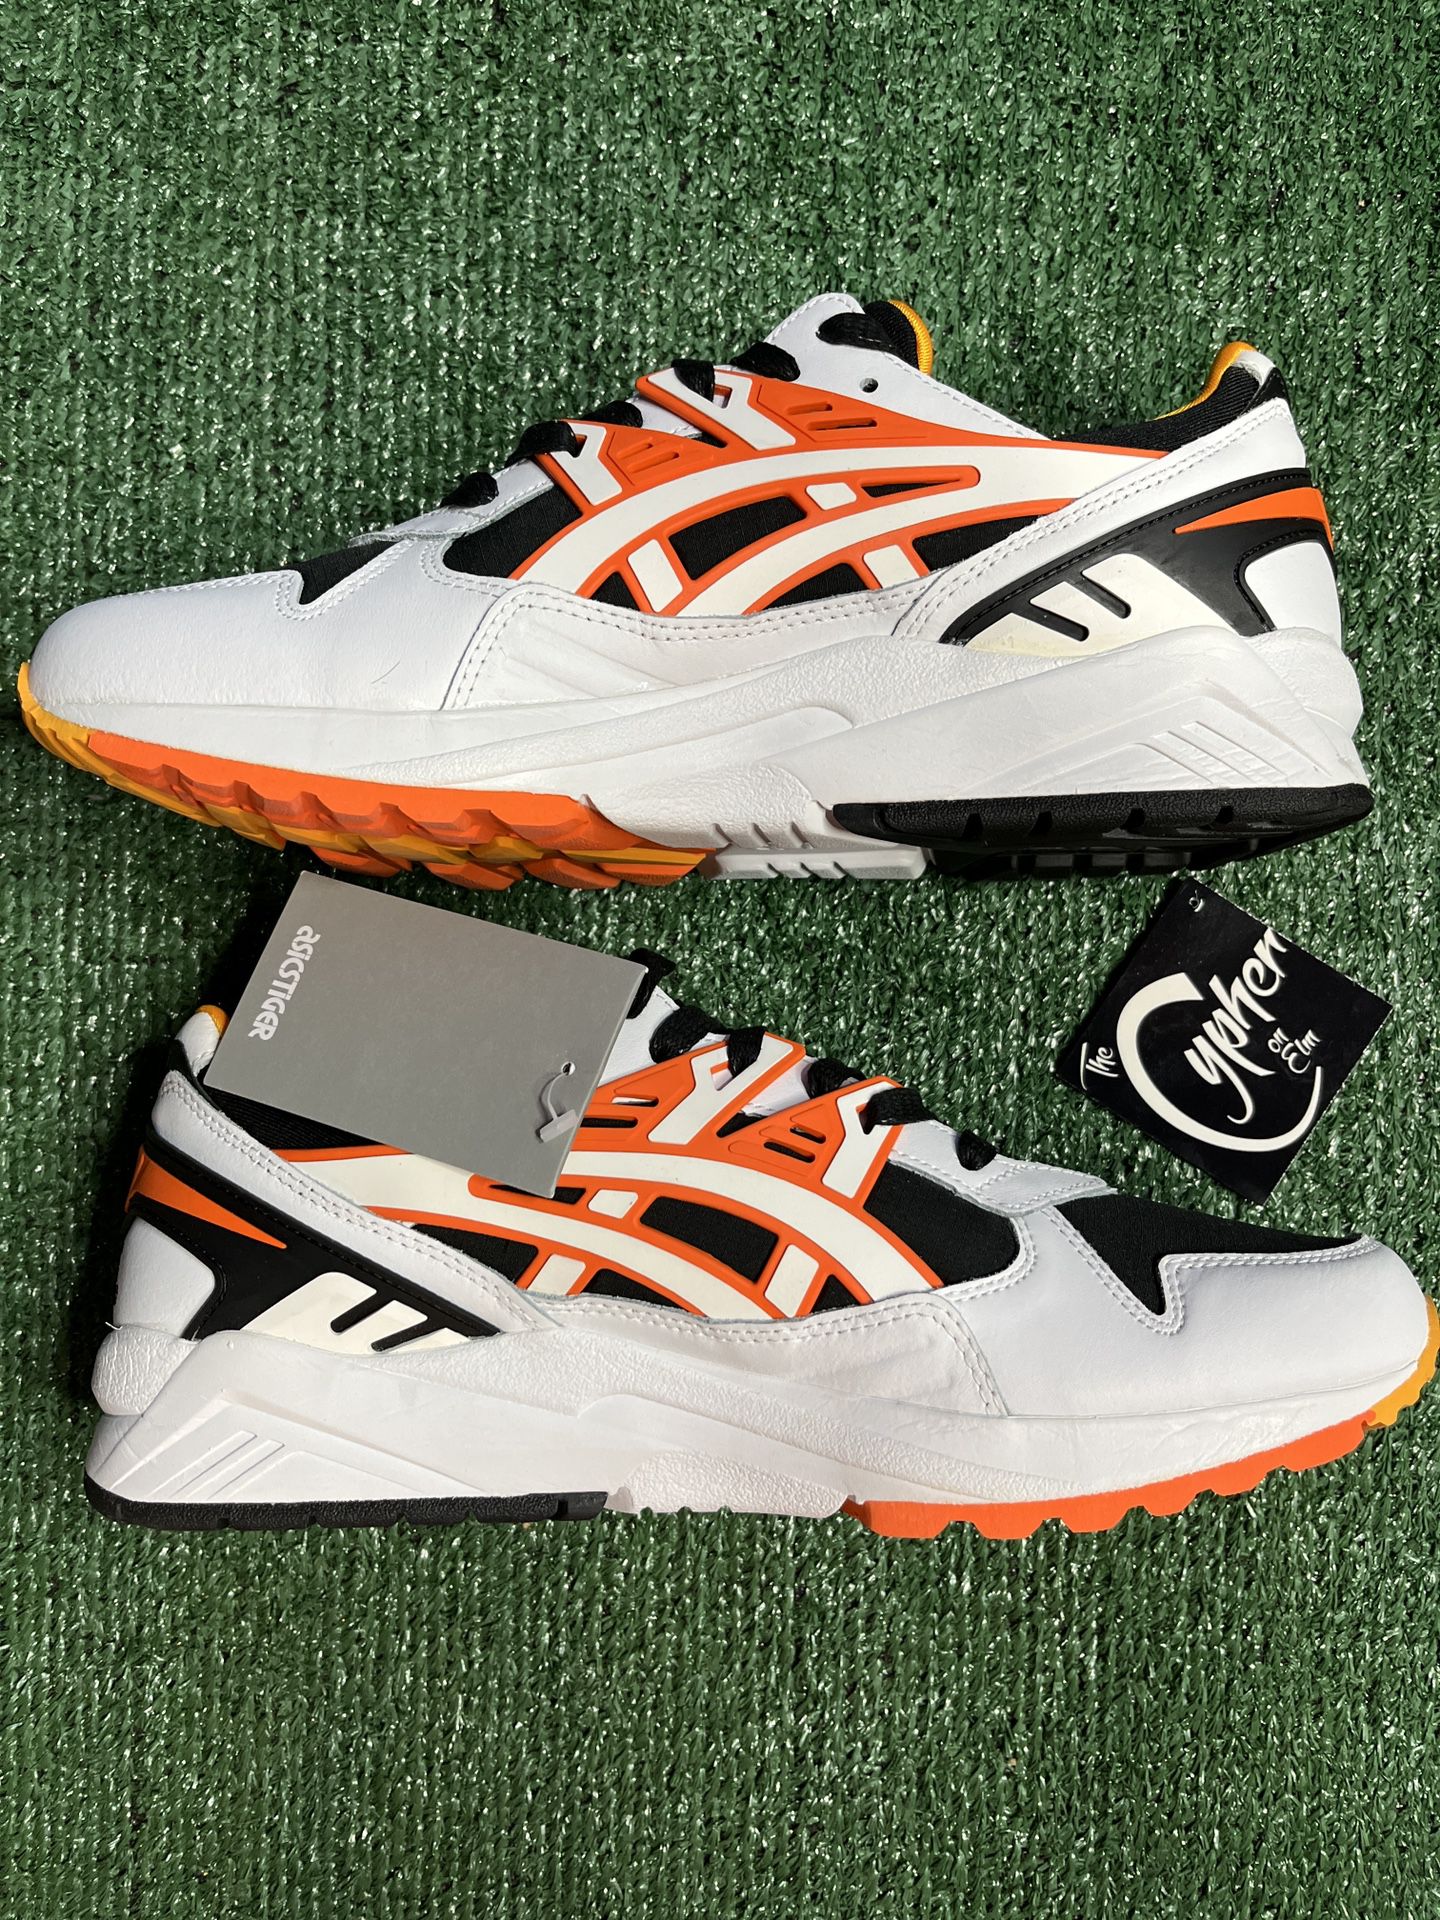 ASICS Gel Kayano Trainer ‘Happy Chaos’   Size 9.5 